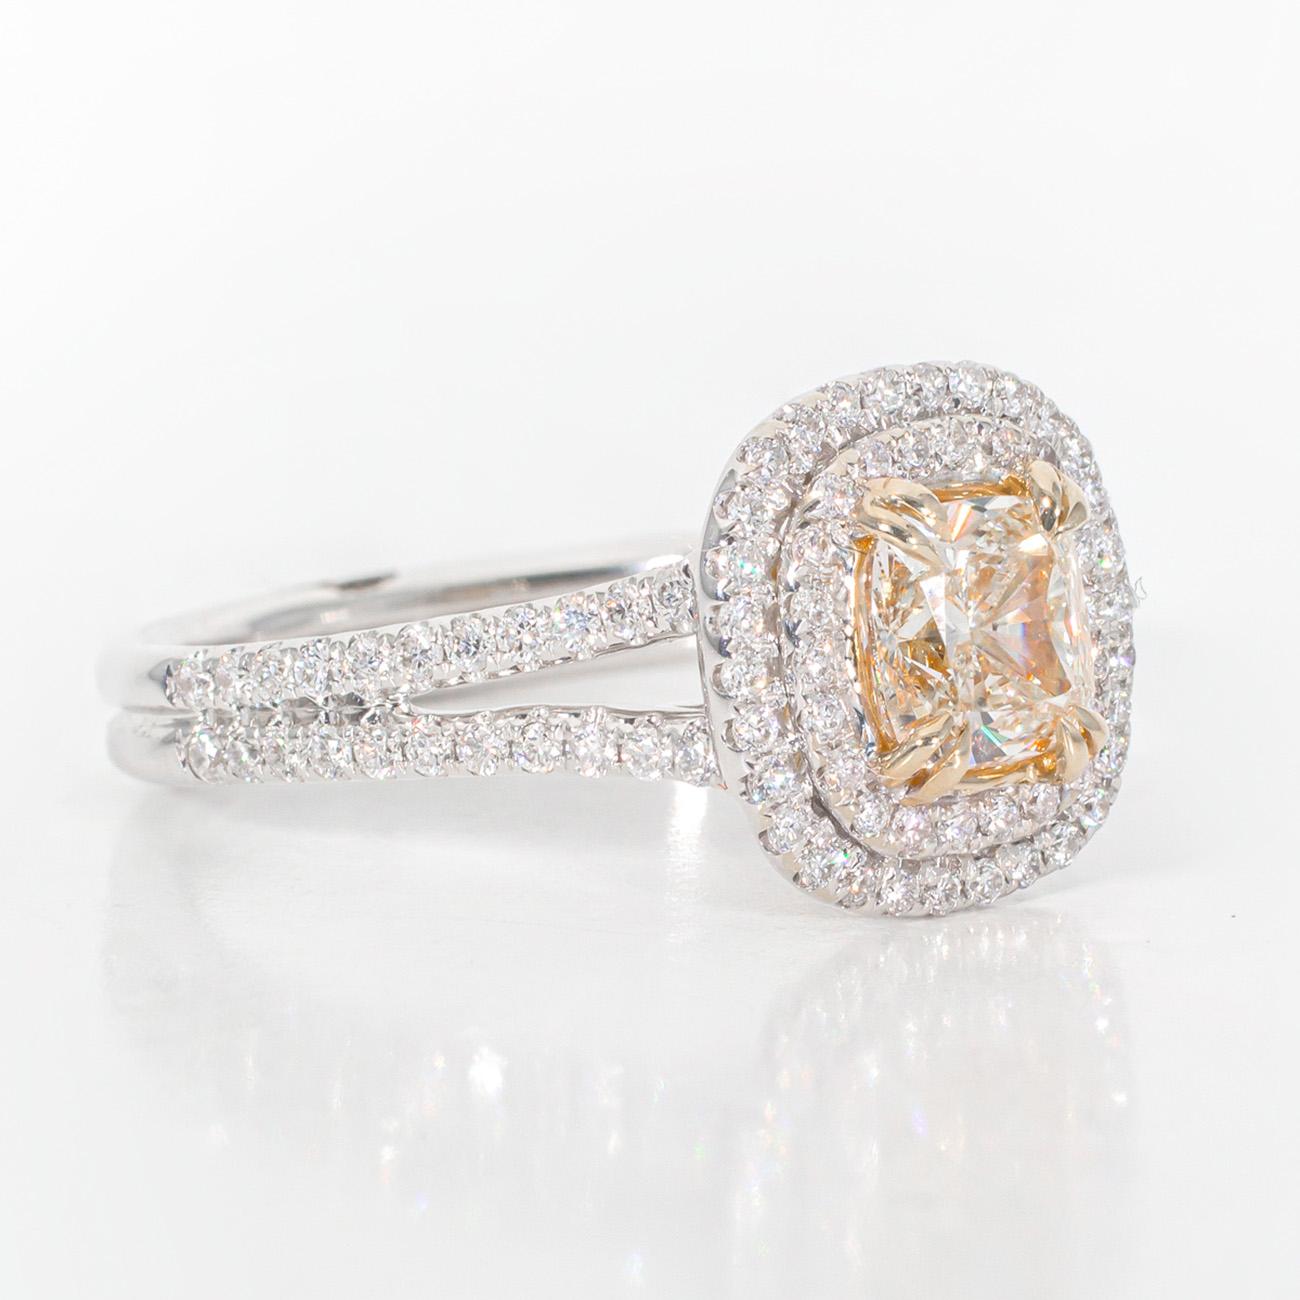 Cushion Cut Double Halo Ring in 18K WG with Fancy Yellow Cushion Diamond Center. D1.37ct. For Sale